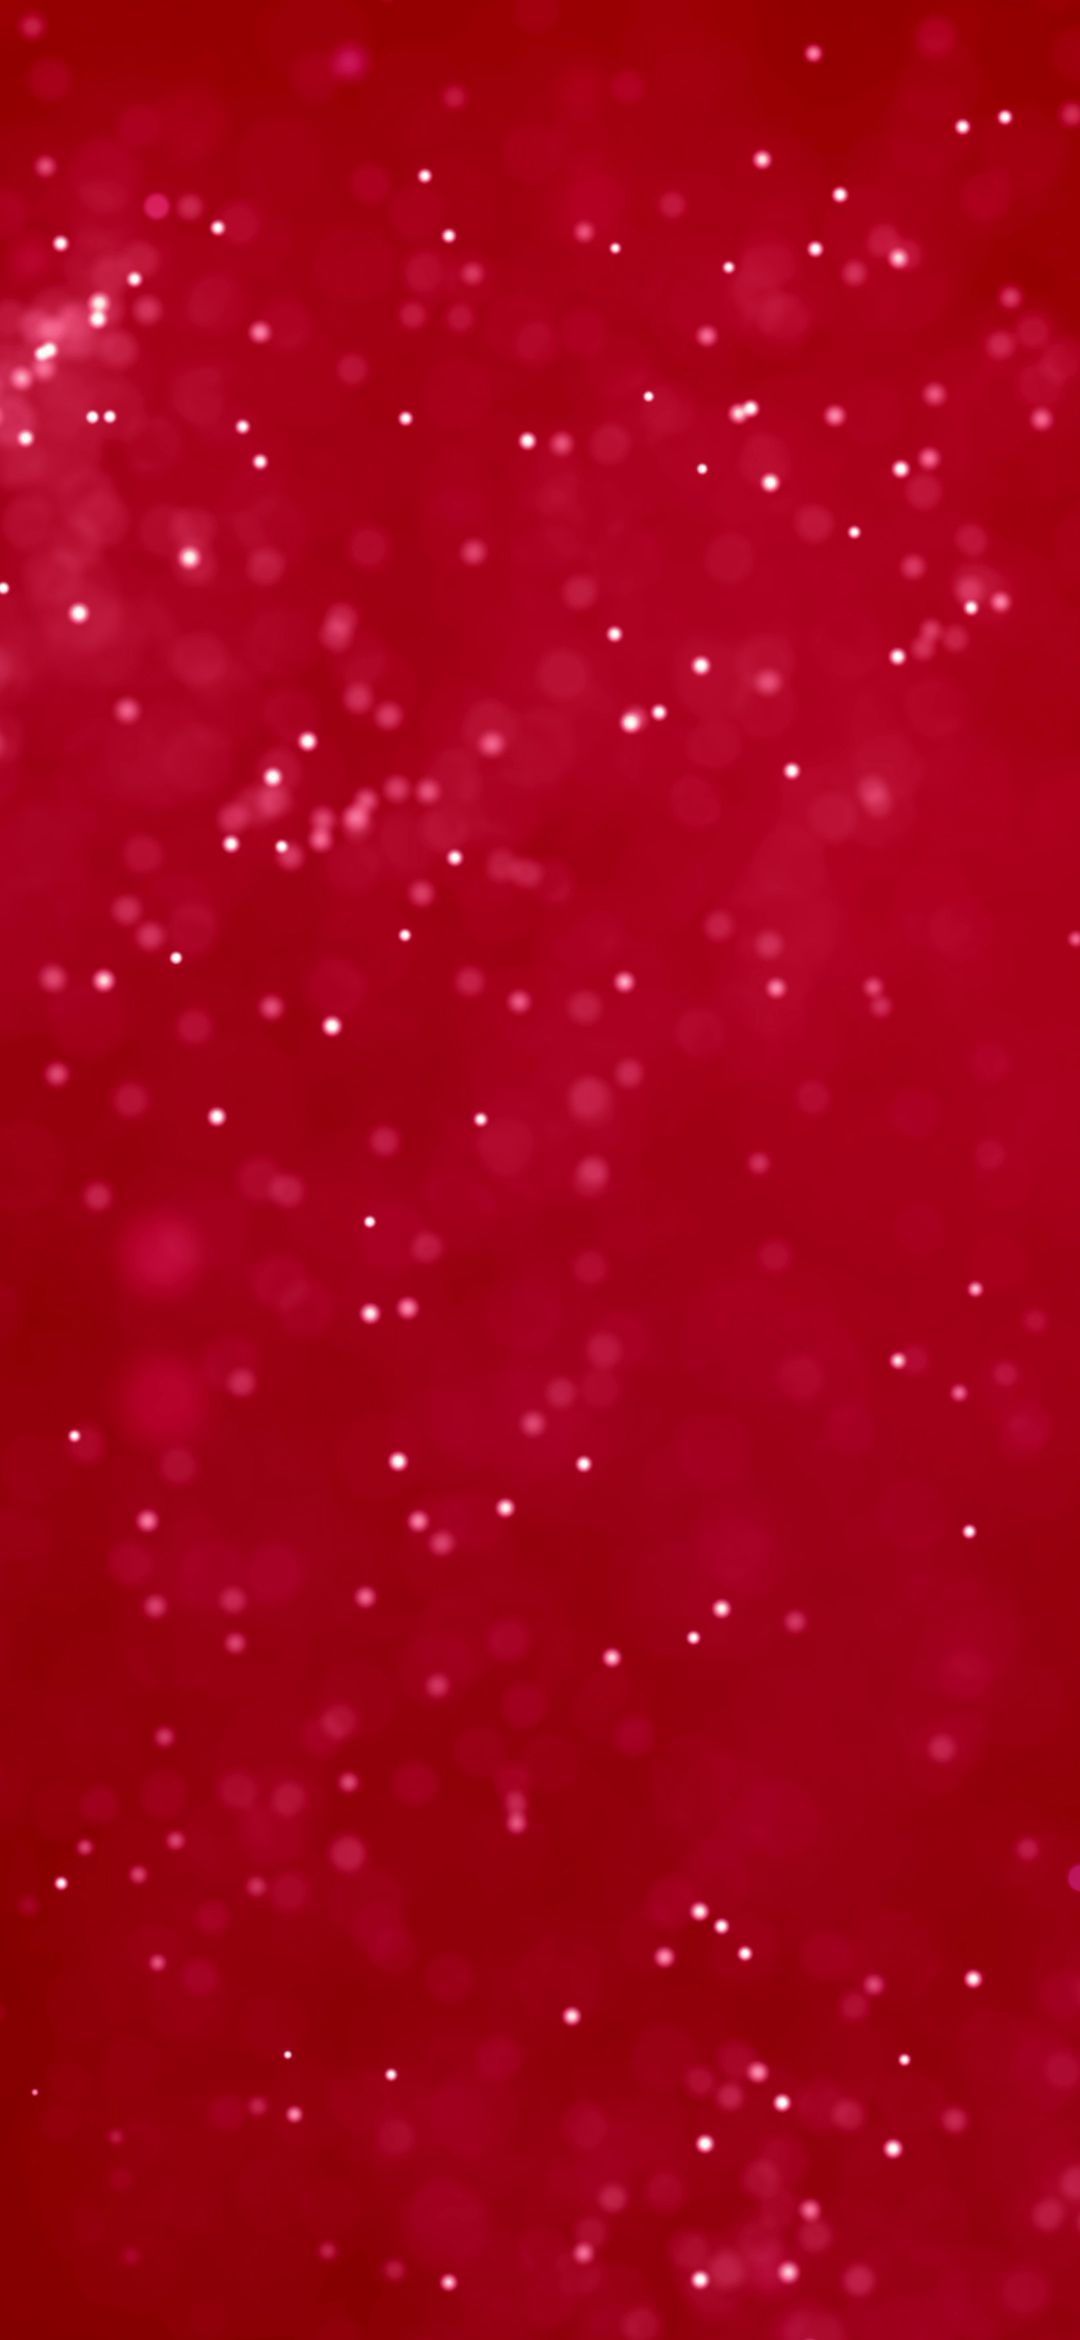 Wallpaper for Vivo V15 with Abstract Christmas Red Gradient Wallpaper. Wallpaper Download. High Resolution Wallpaper